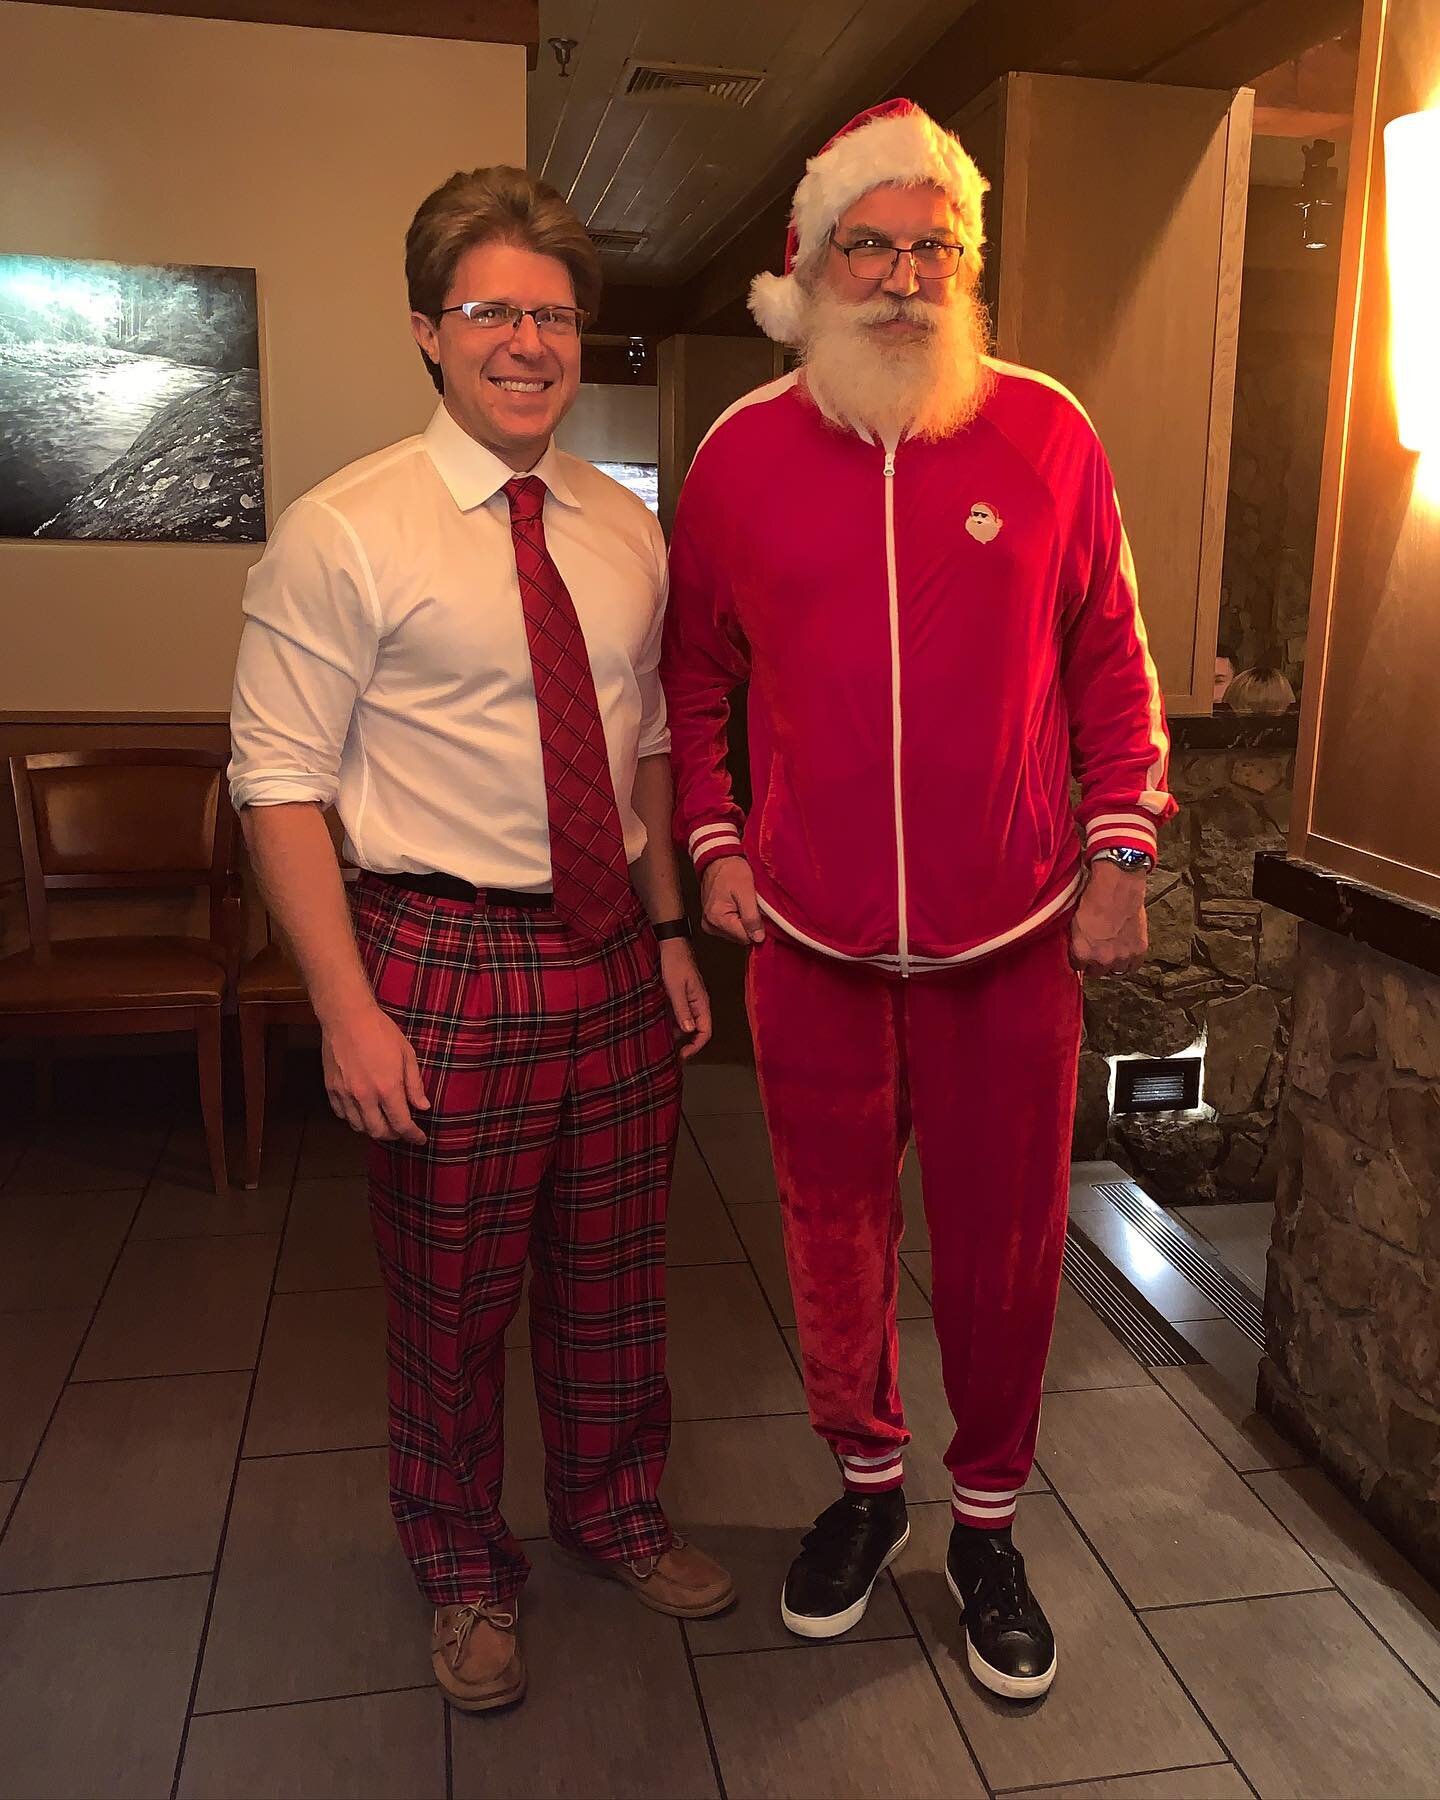 From the bottom of our hearts, tracksuit Santa and I wish you a very Merry Christmas.🎄🎉